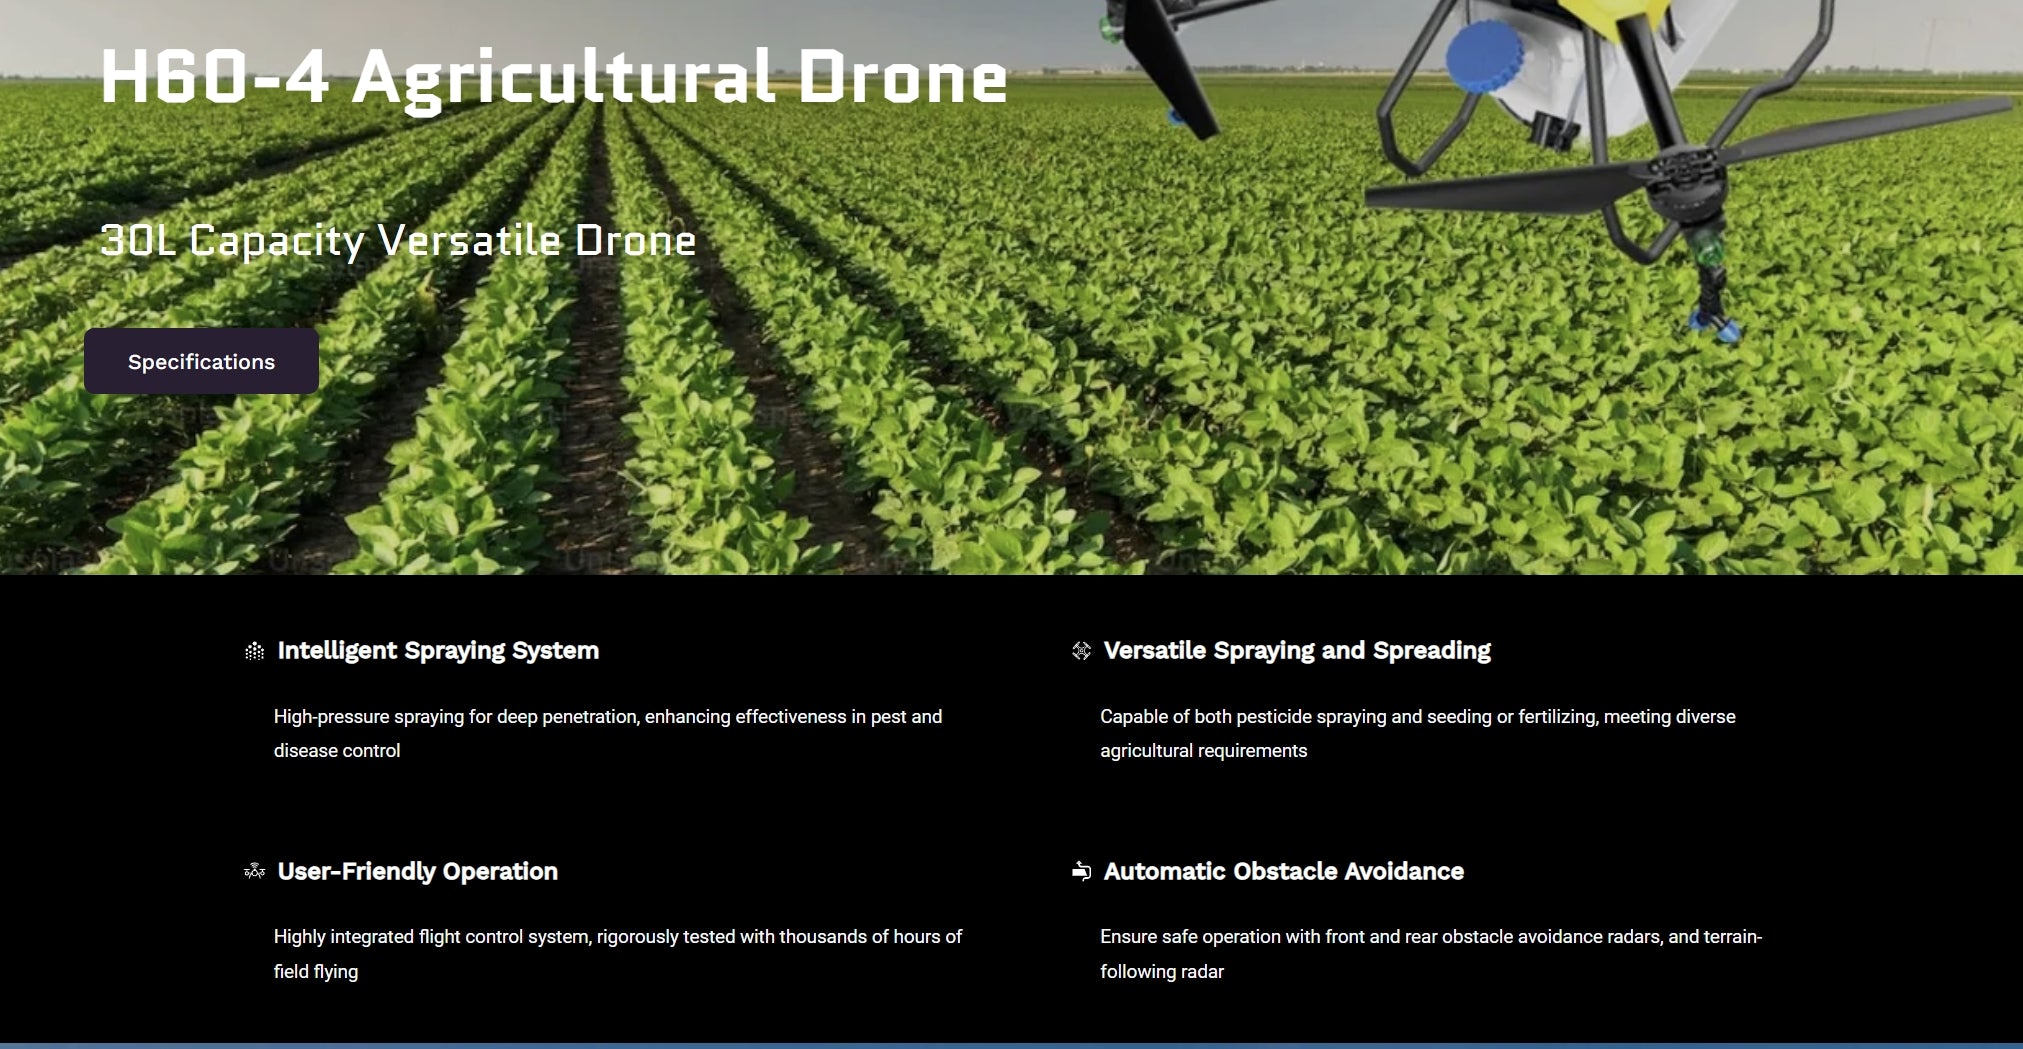 H60-4 Agricultural Drone, H6O-4 Agricultural Drone 30L Capacity Versatile Drone Specific